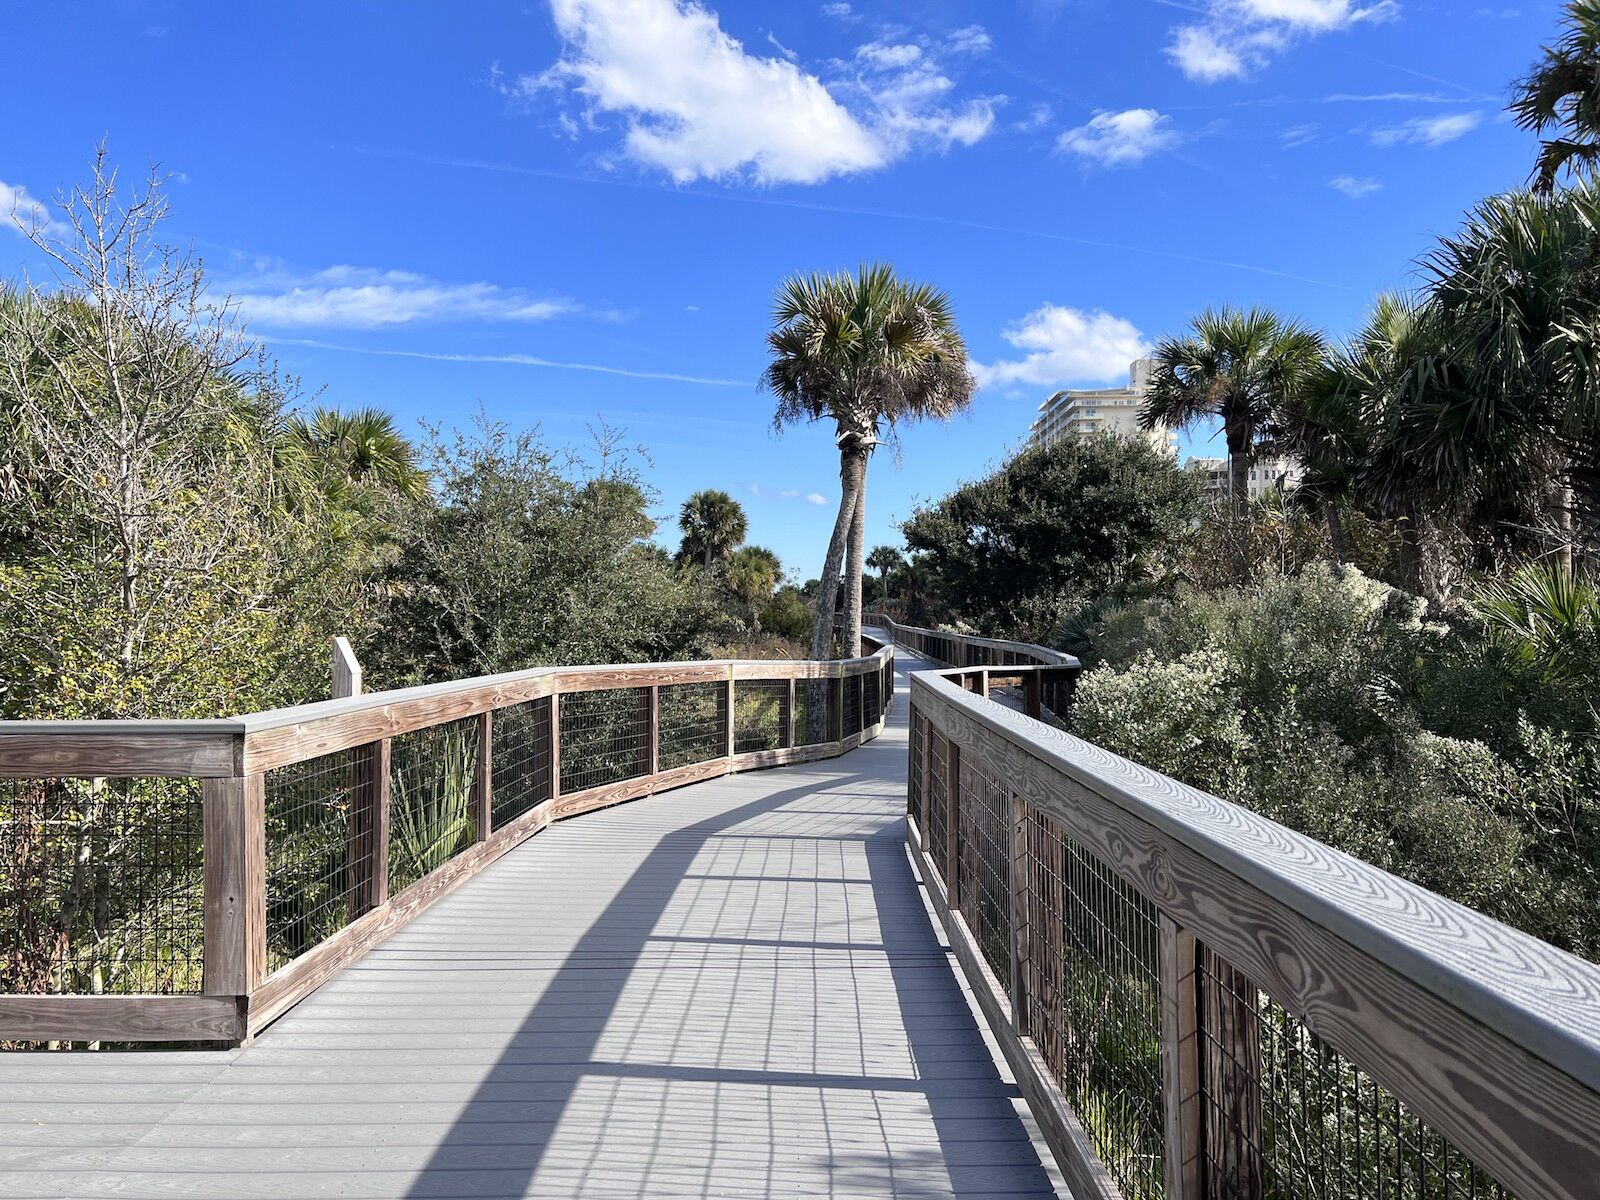 Walking through Dunes Park is one of the most popular things to do in New Smyrna Beach, Florida 